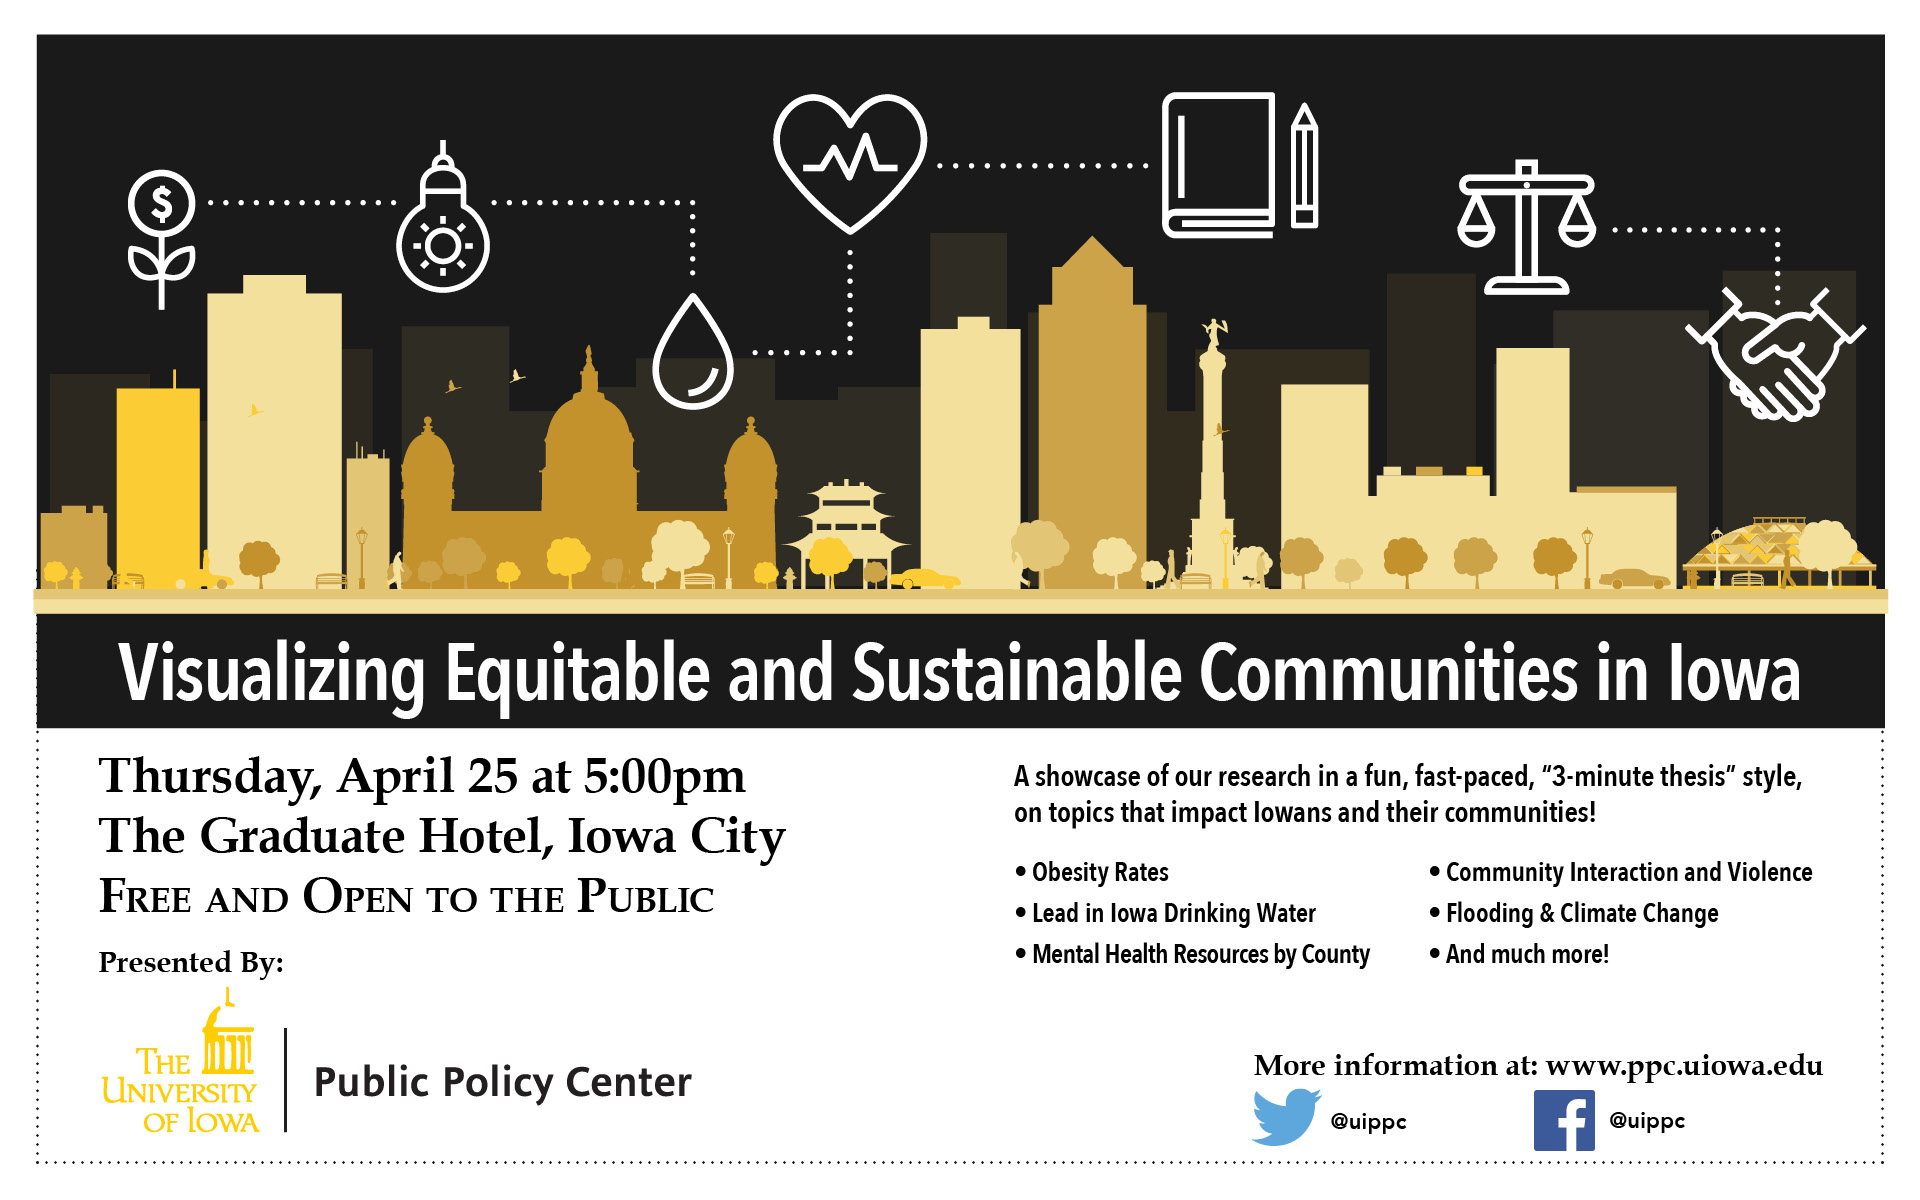 Visualizing Equitable and Sustainable Communities in Iowa, Thursday April 25, 2019 at 5:00 p.m. at the Graduate Hotel: FREE